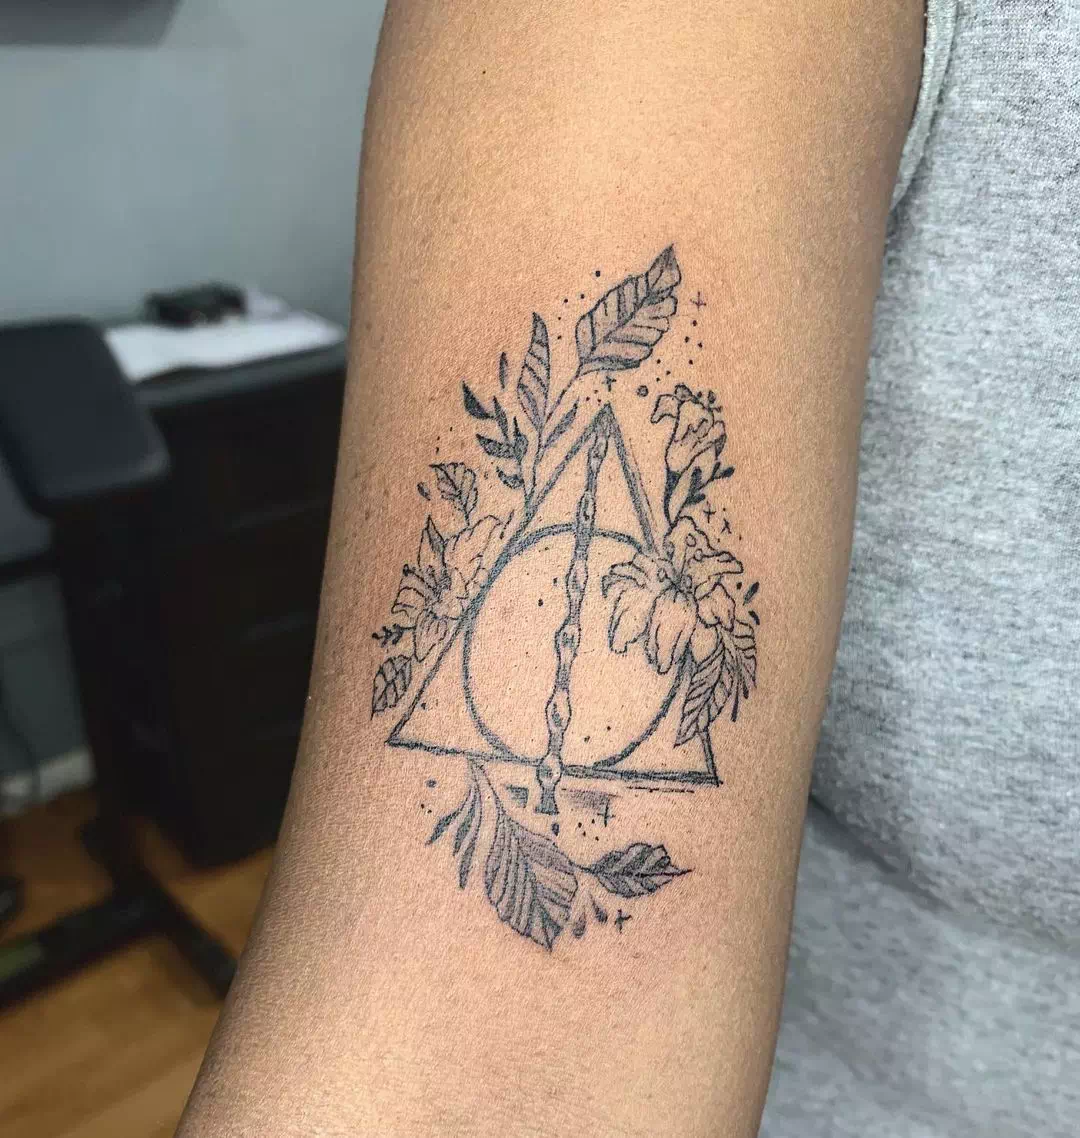 The Deathly Hallows Tattoo